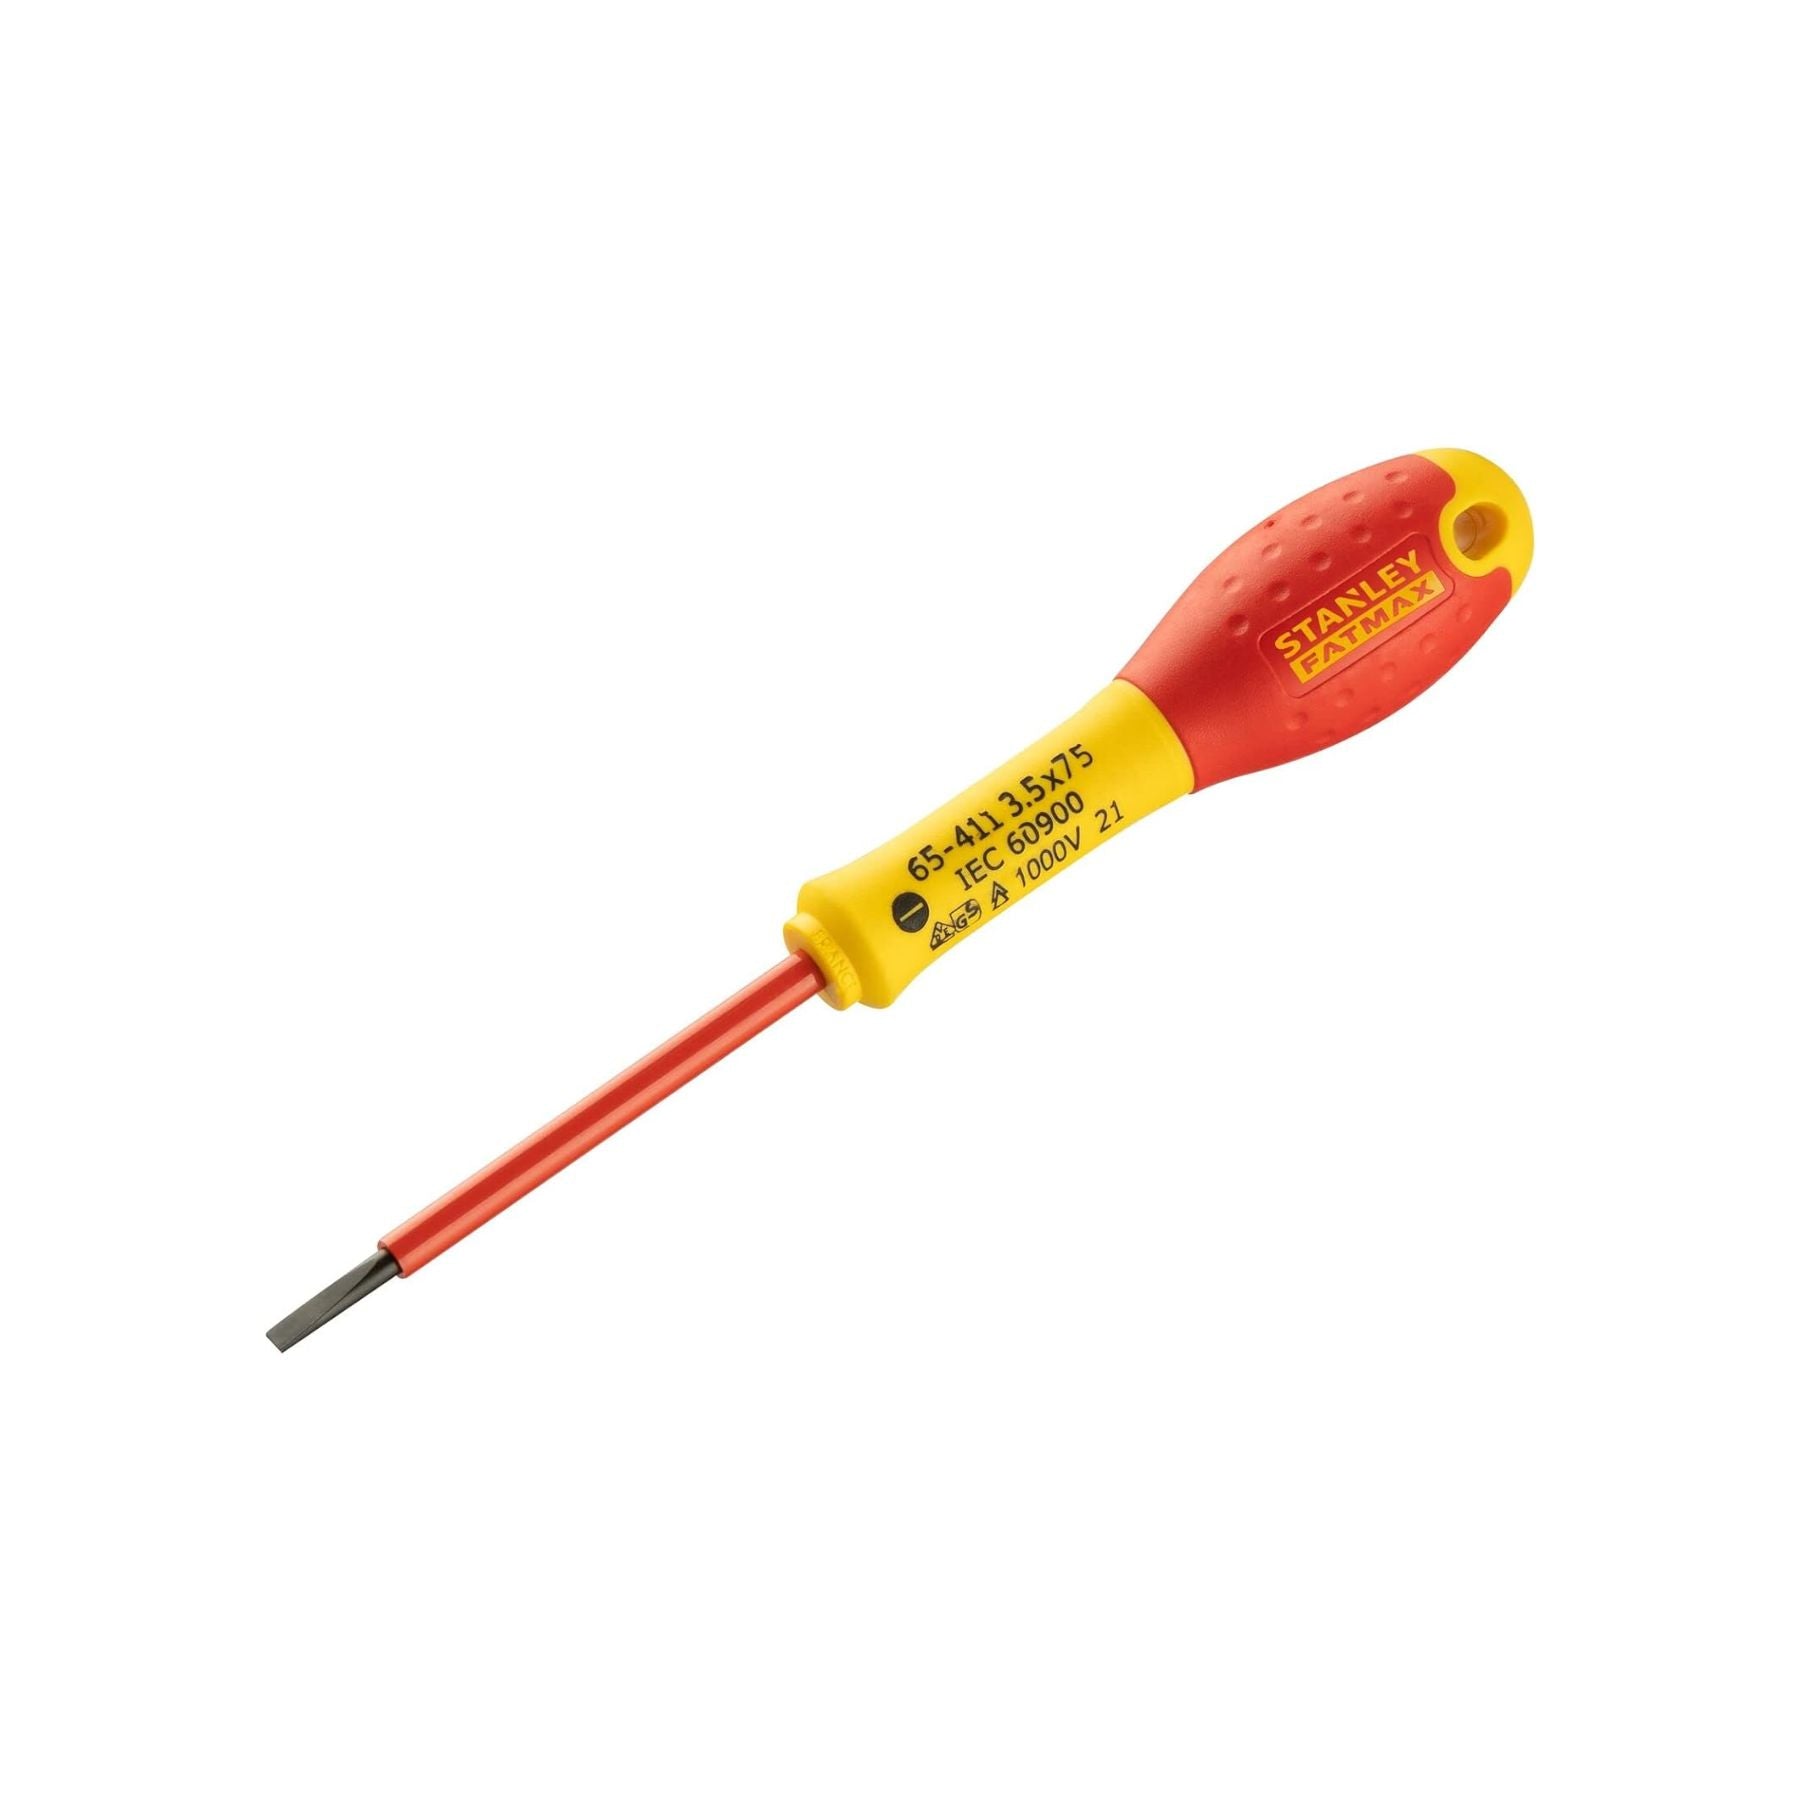 Stanley 0-65-411 VDE Screwdriver , Red/Yellow